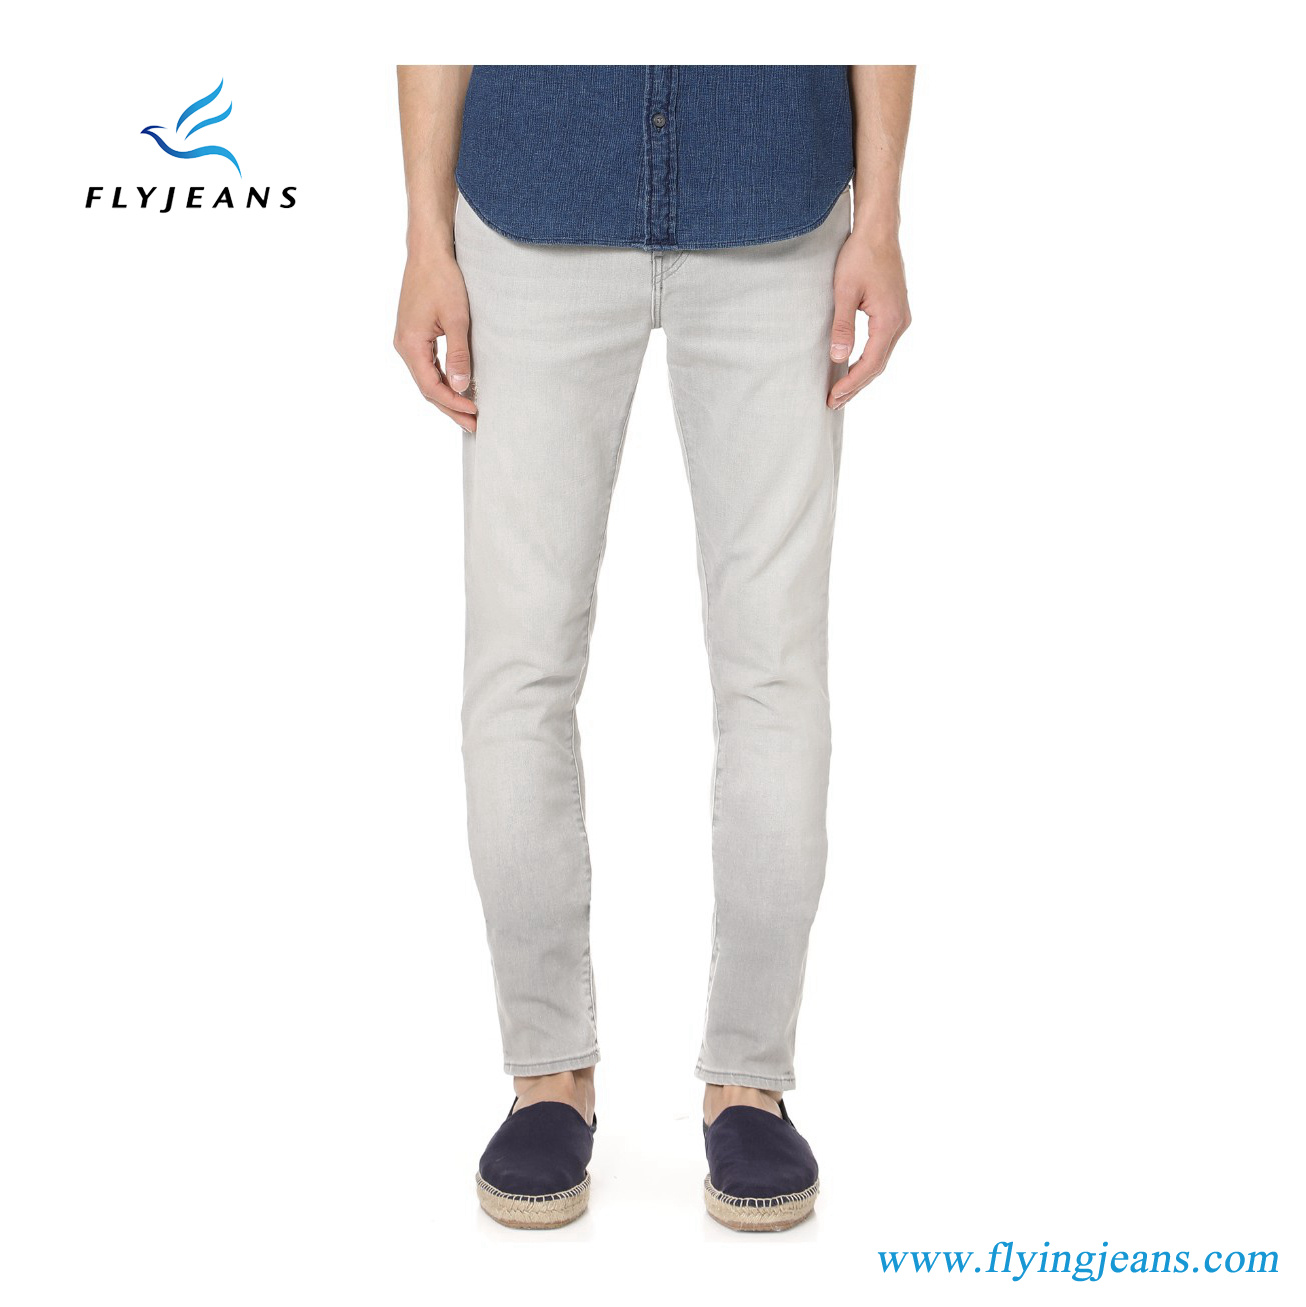 Skinny-Fit Denim Jeans with Heavy Fading by Fly Jeans